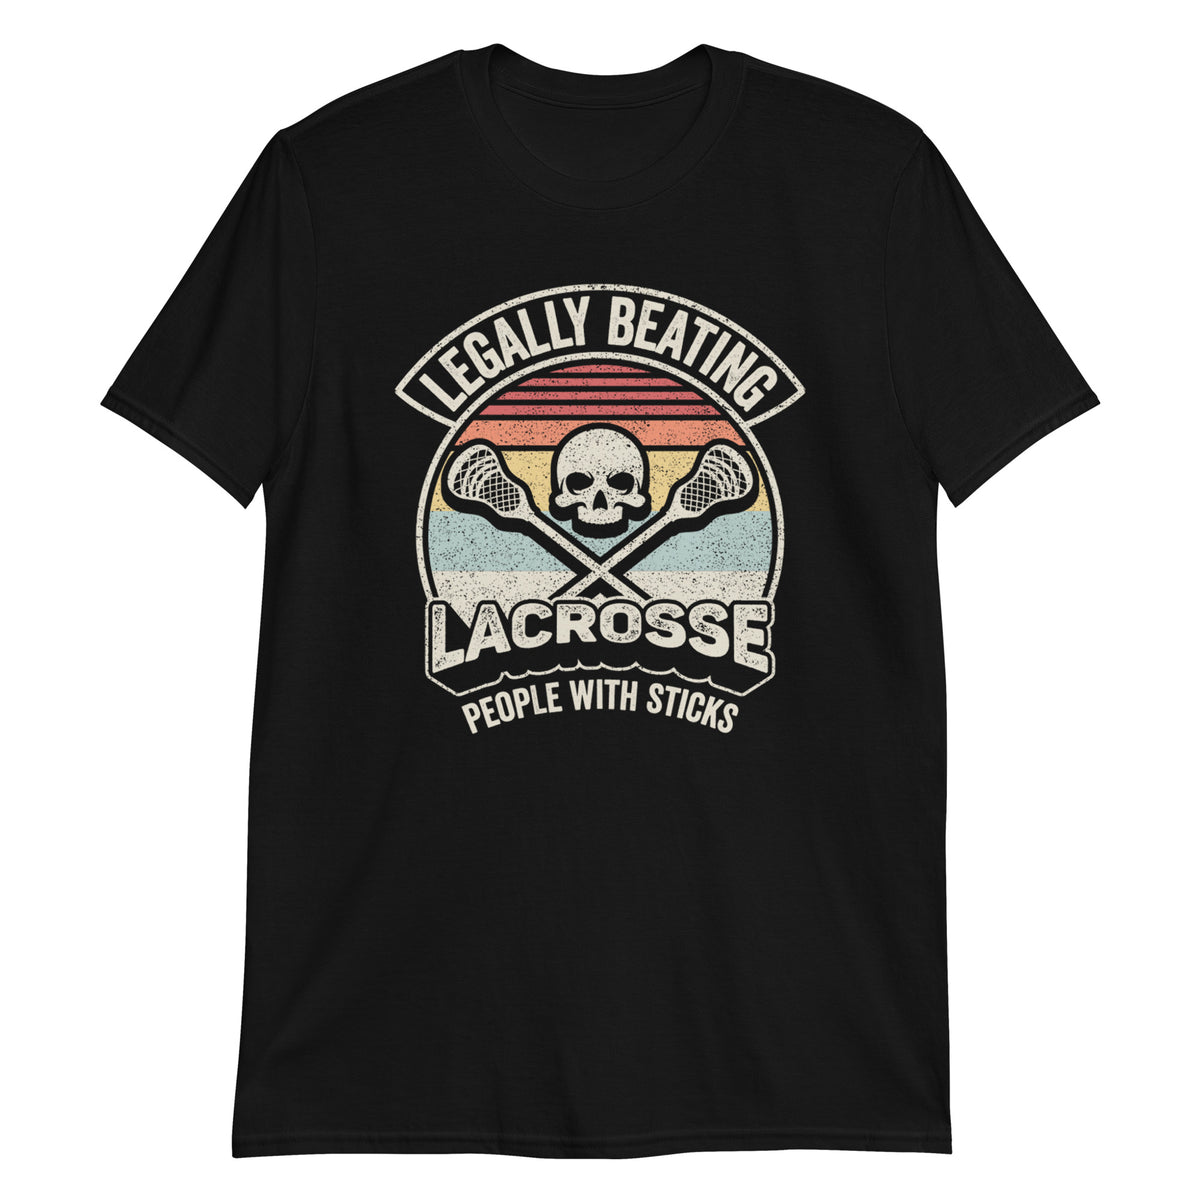 Legally Beating Lacrosse People With Sticks T-Shirt